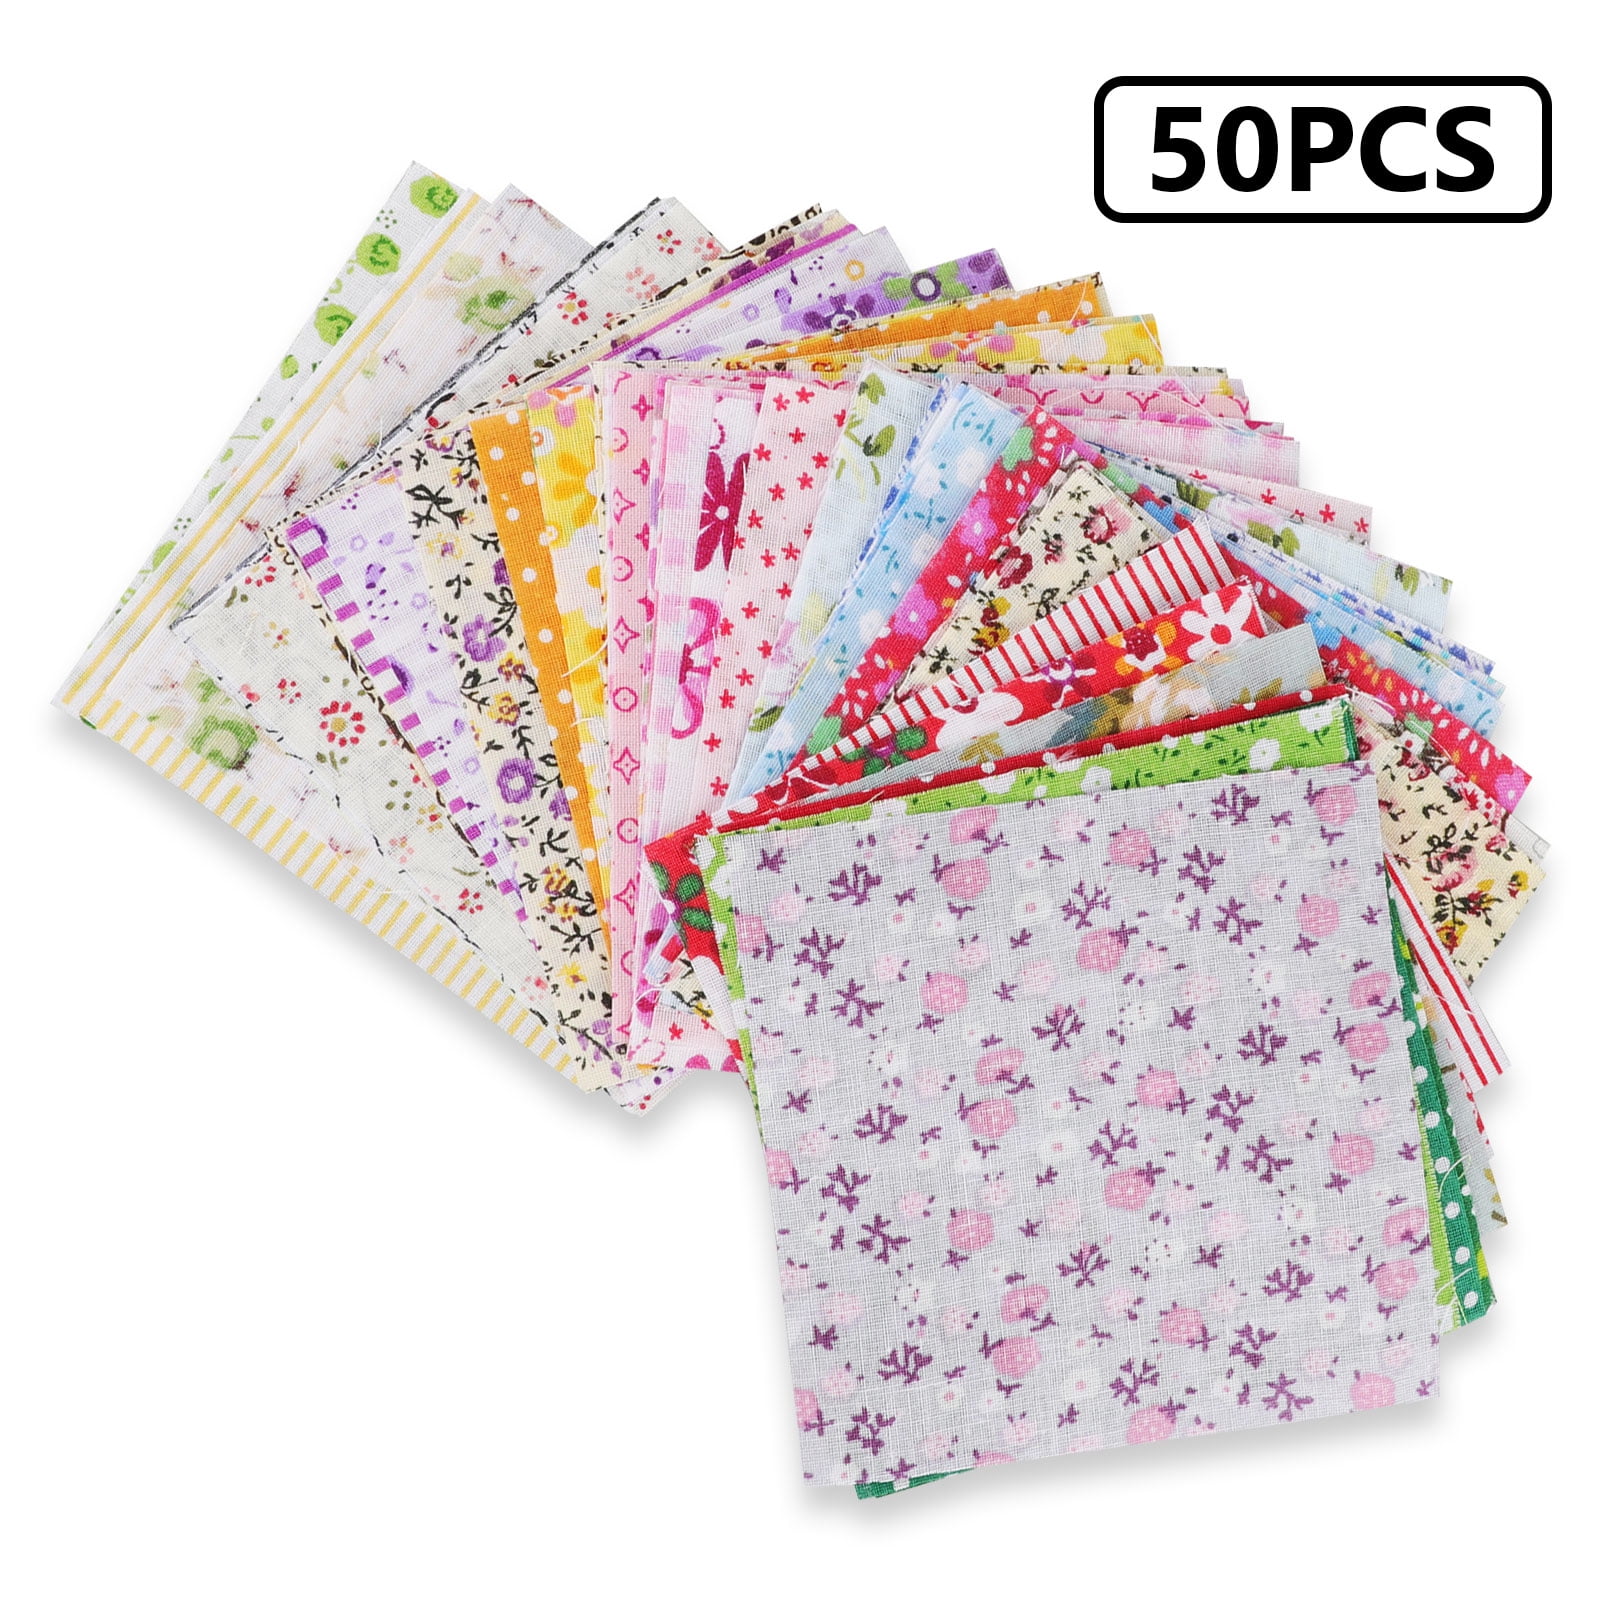 Gooswexmzl 50 Pcs 10 x 10 Craft Fabric Bundle Squares Patchwork Fabric Sets Cotton Material Quilting Fabric for DIY